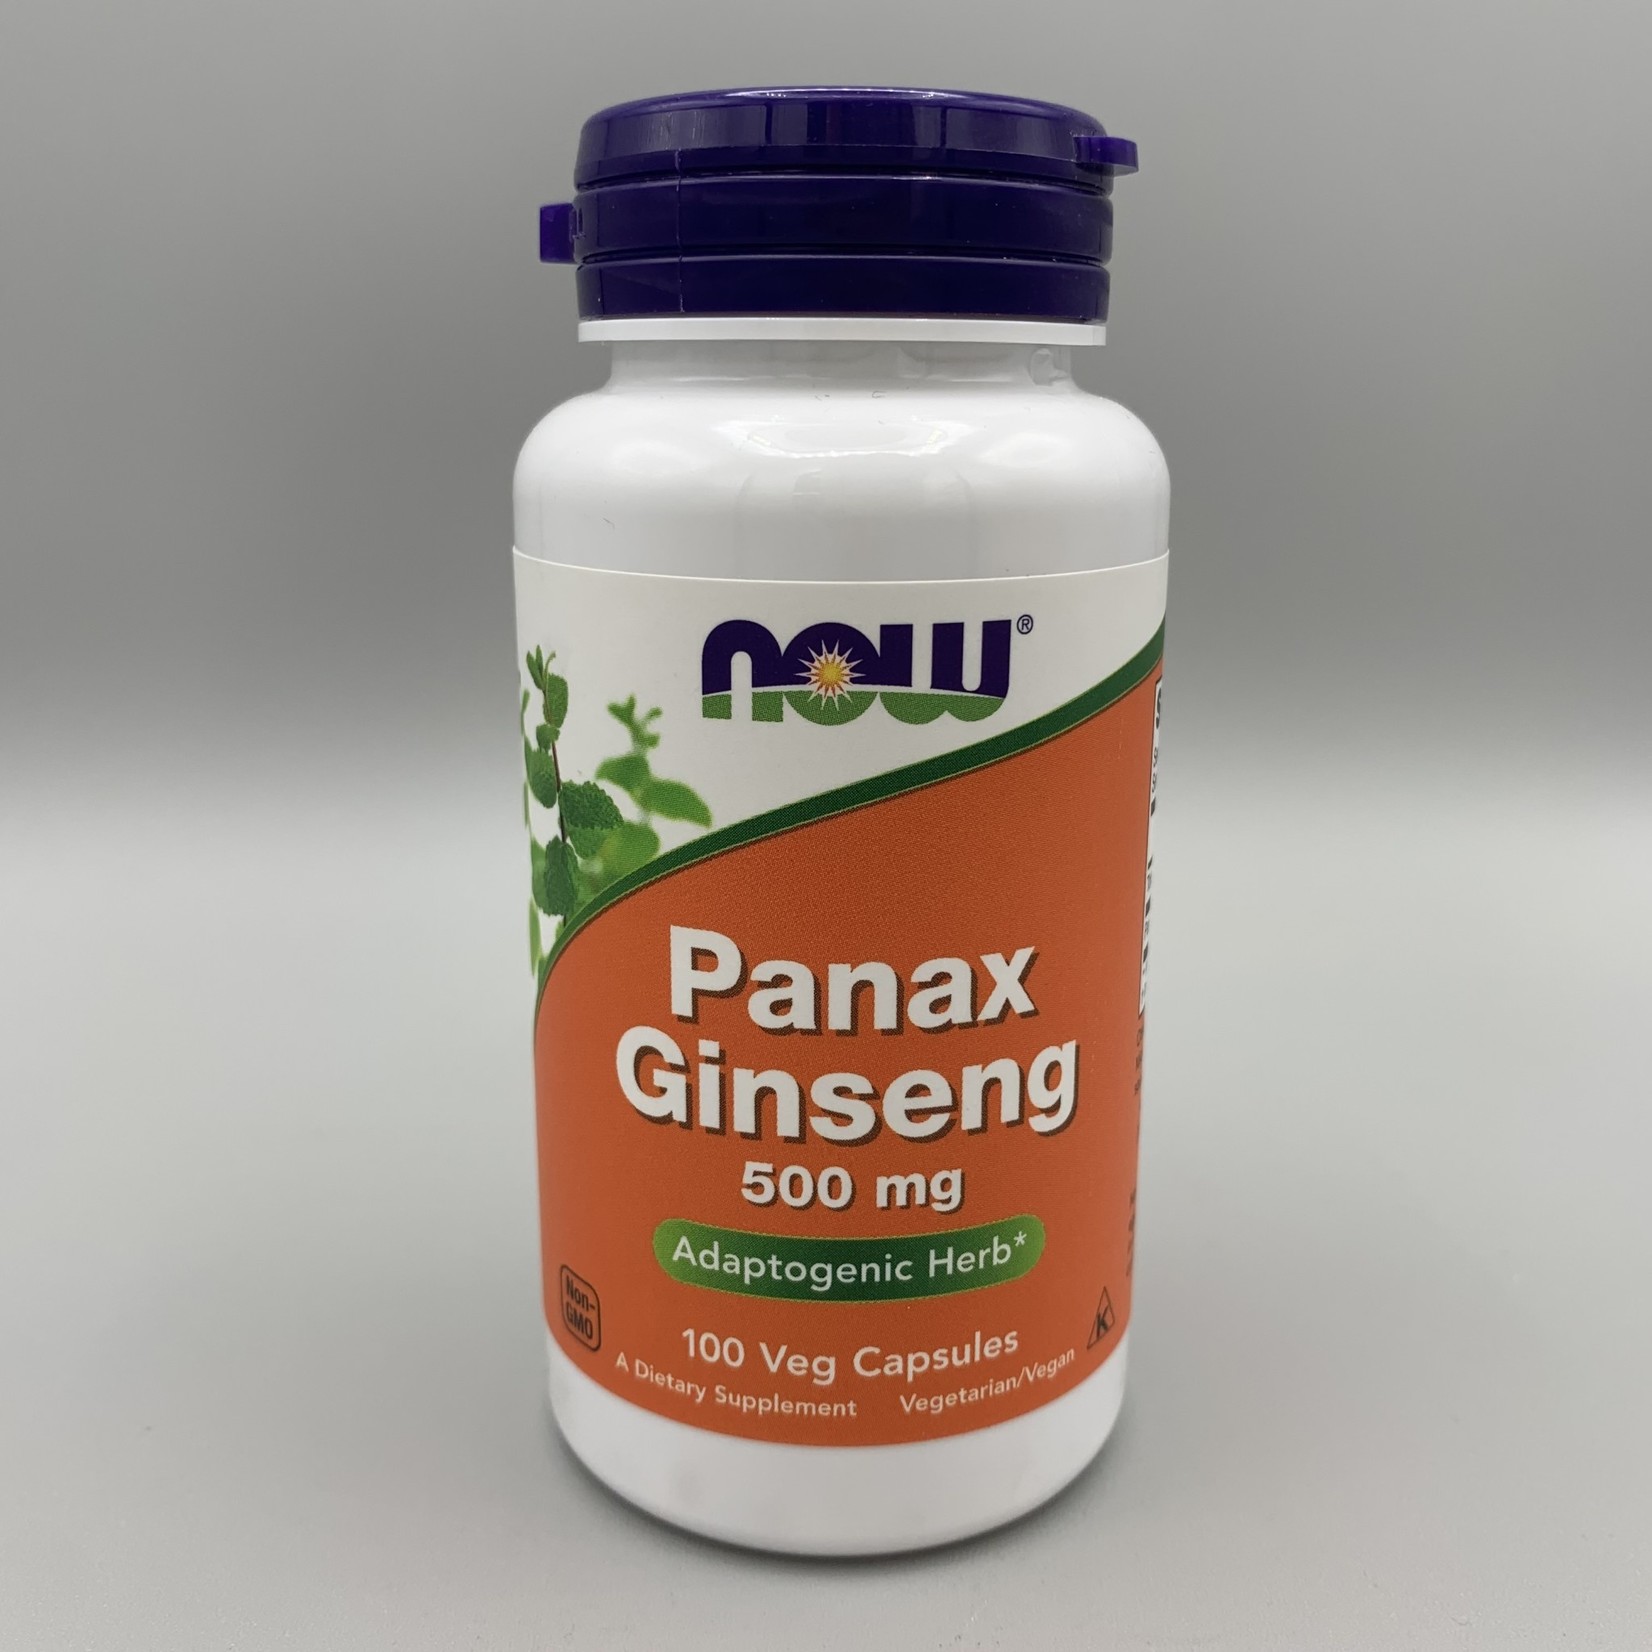 NOW NOW Panax Ginseng - 500 mg, 100 Veg. Capsules